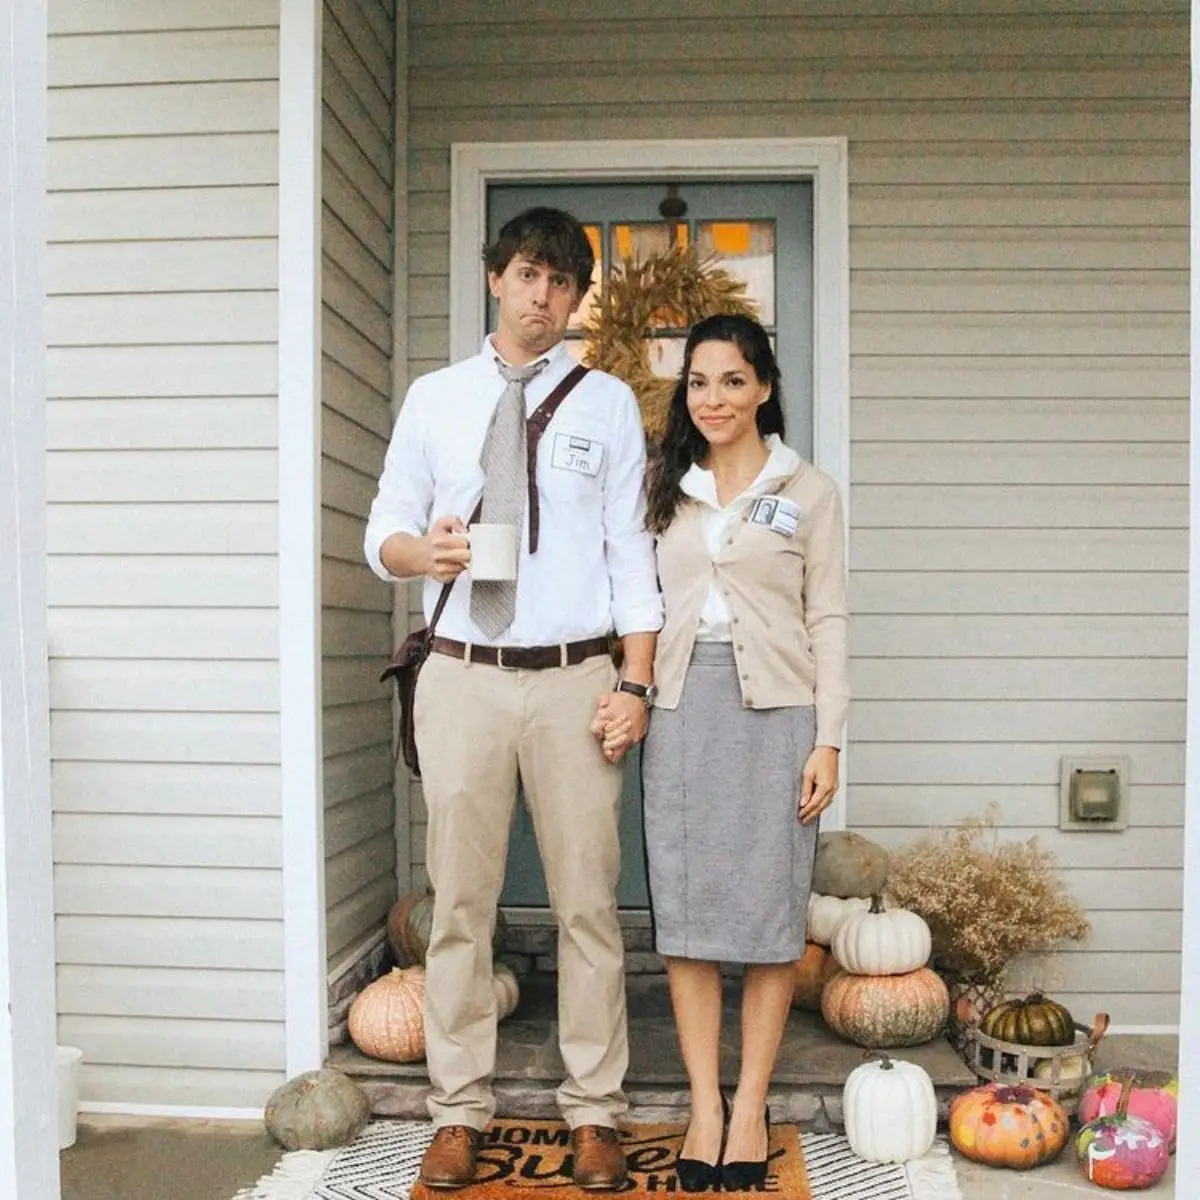 Jim and Pam from The Office costumes